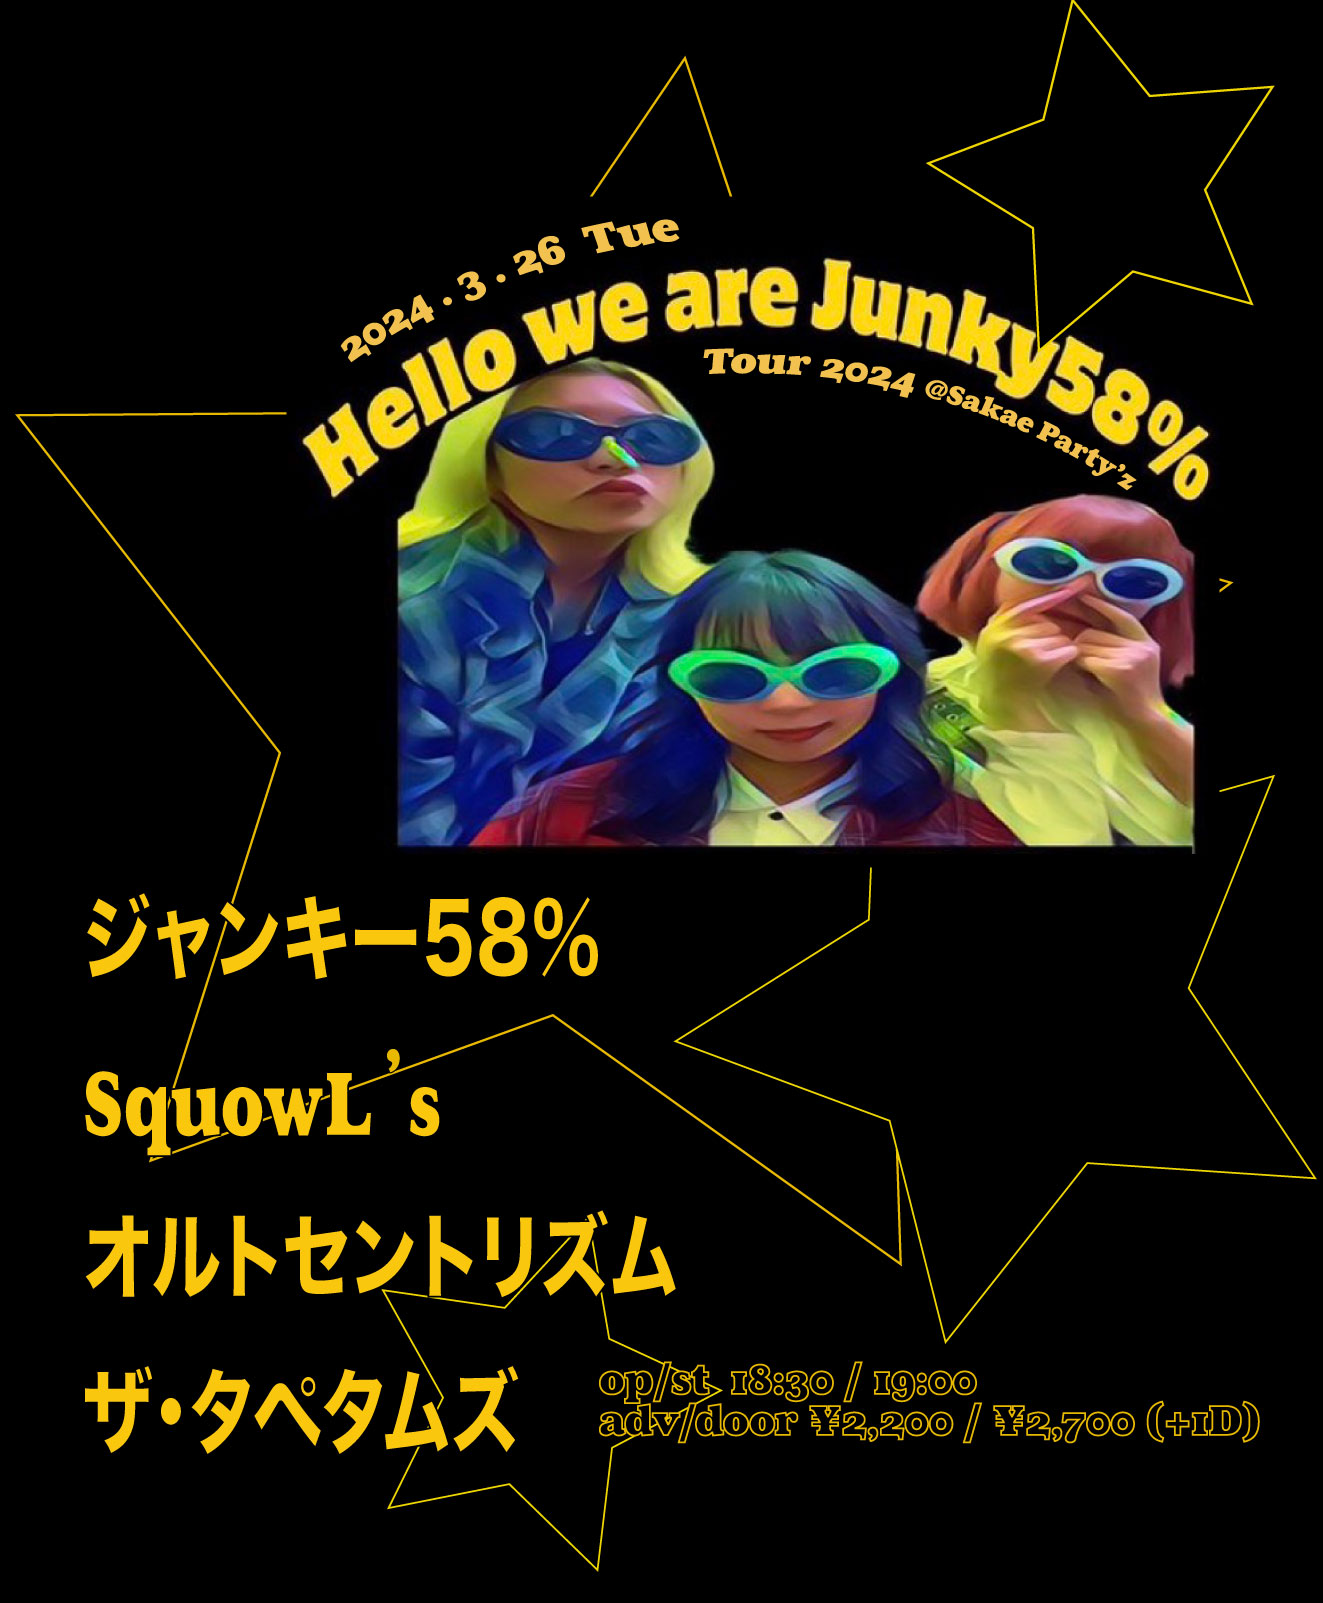 Hello we are Junky58% Tour 2024